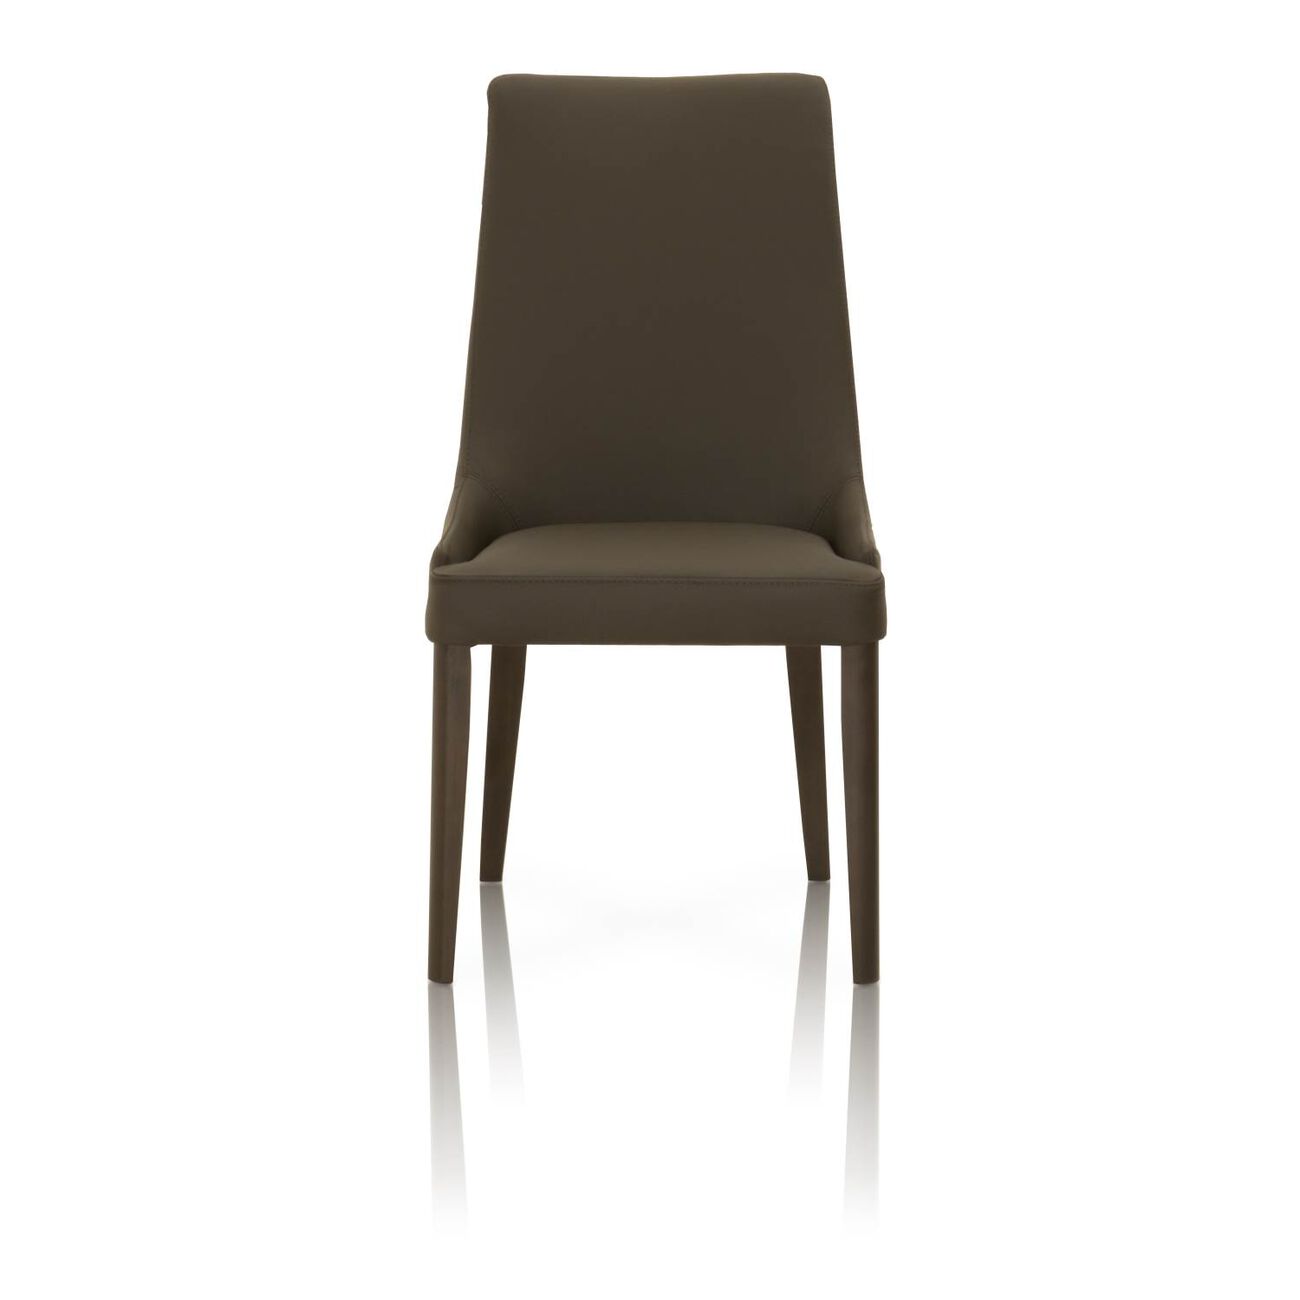 Leatherette Dining Chairs With Wooden Legs Set of 2 Dark Umber Brown